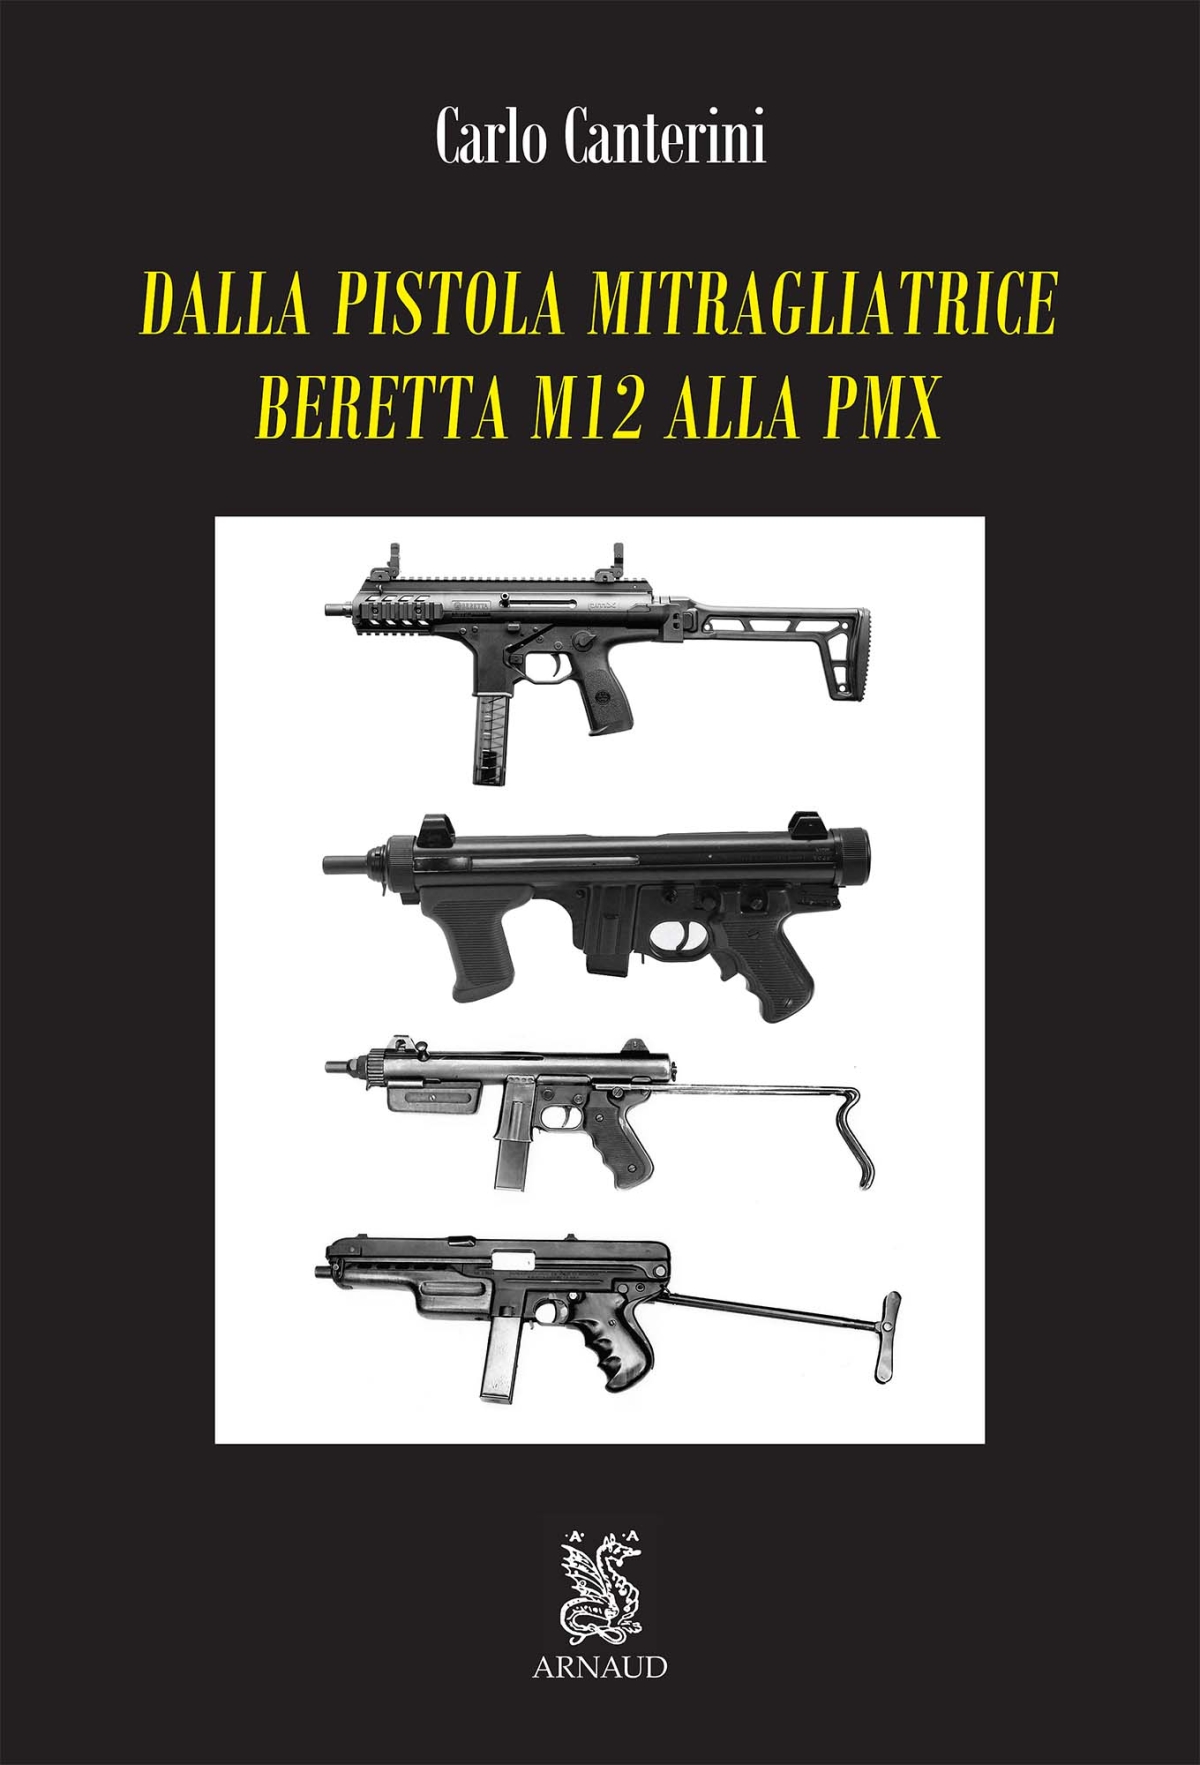 From the Beretta PM-12 to the PMX, a new book on the history of Italian sub-machine guns